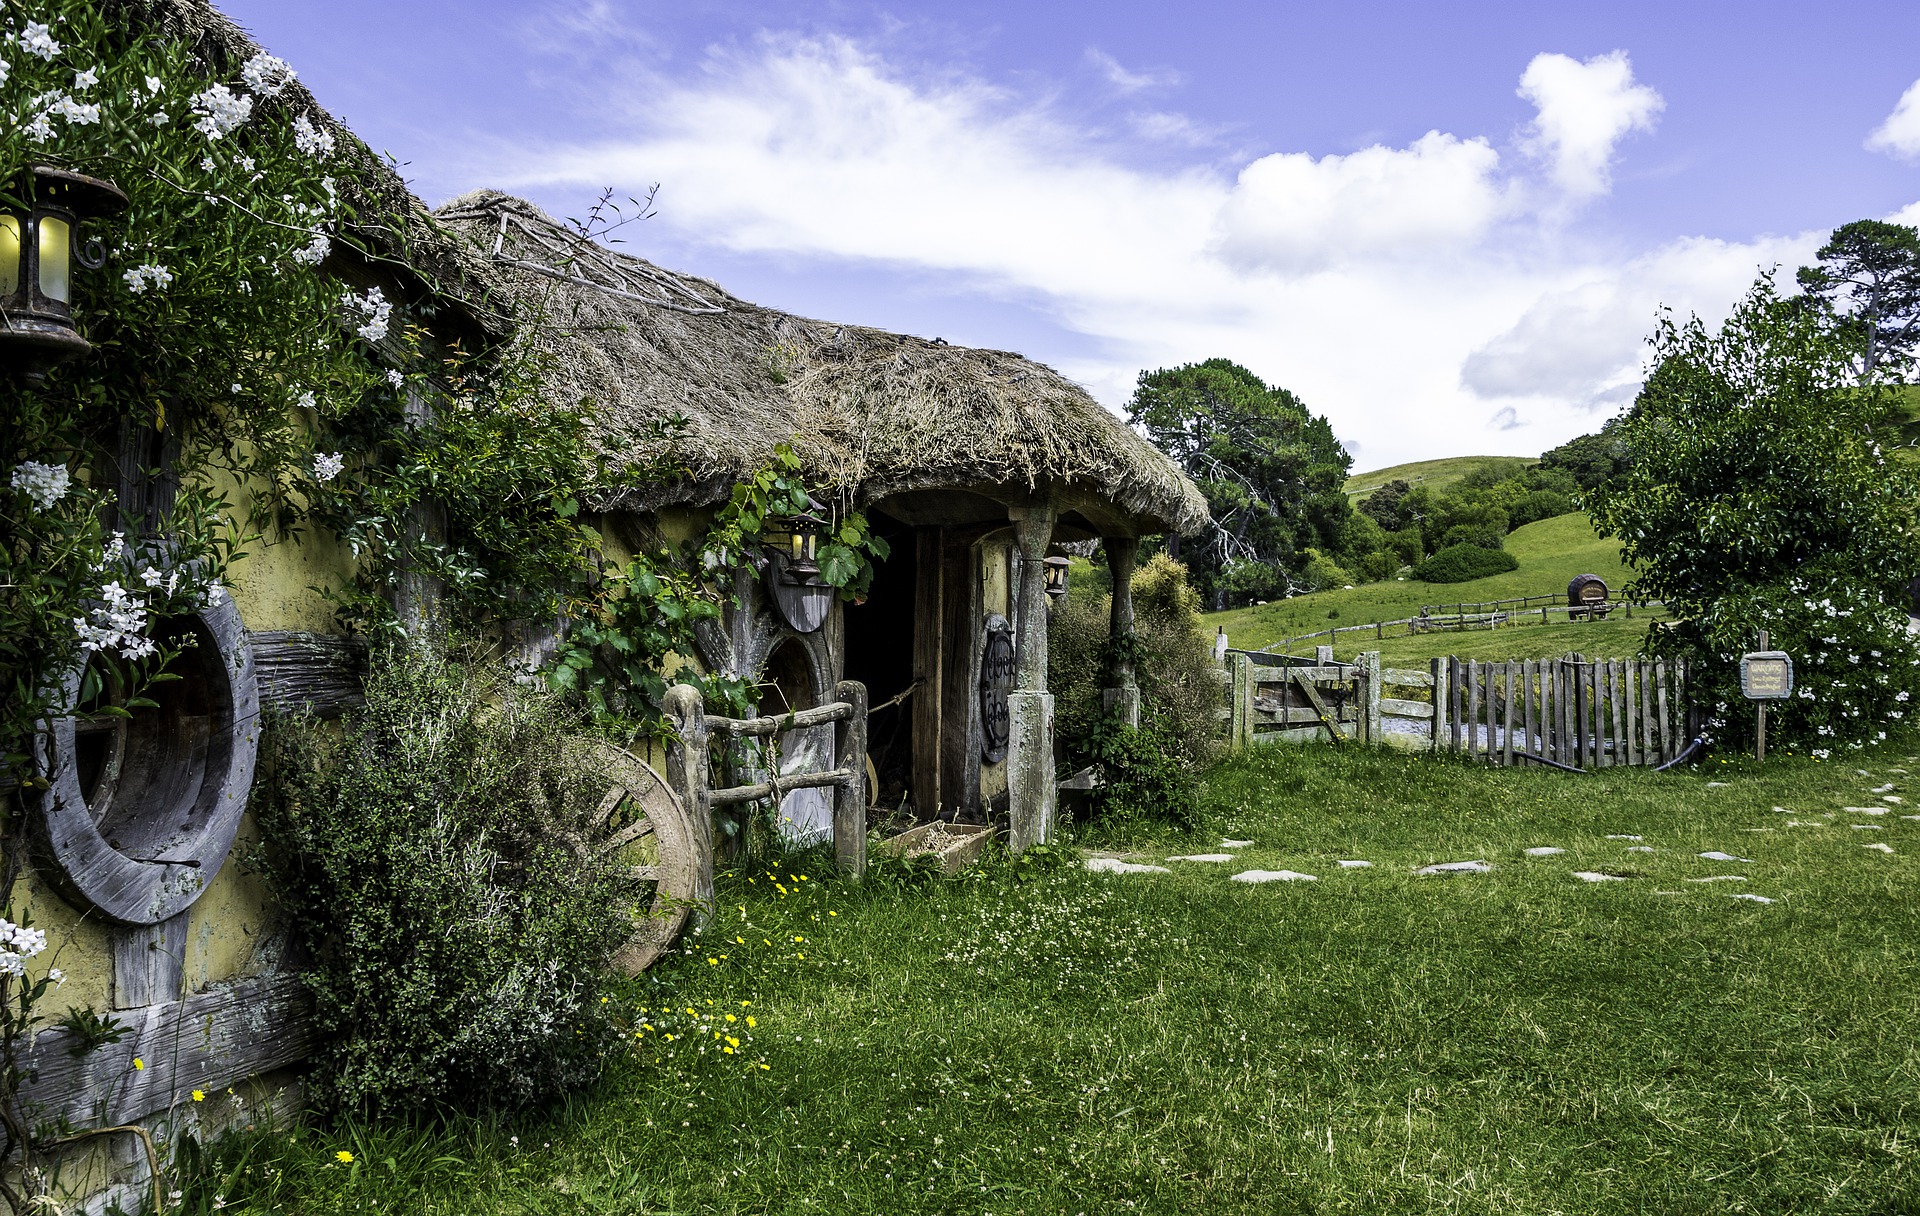 hobbit shire setting in new zealand